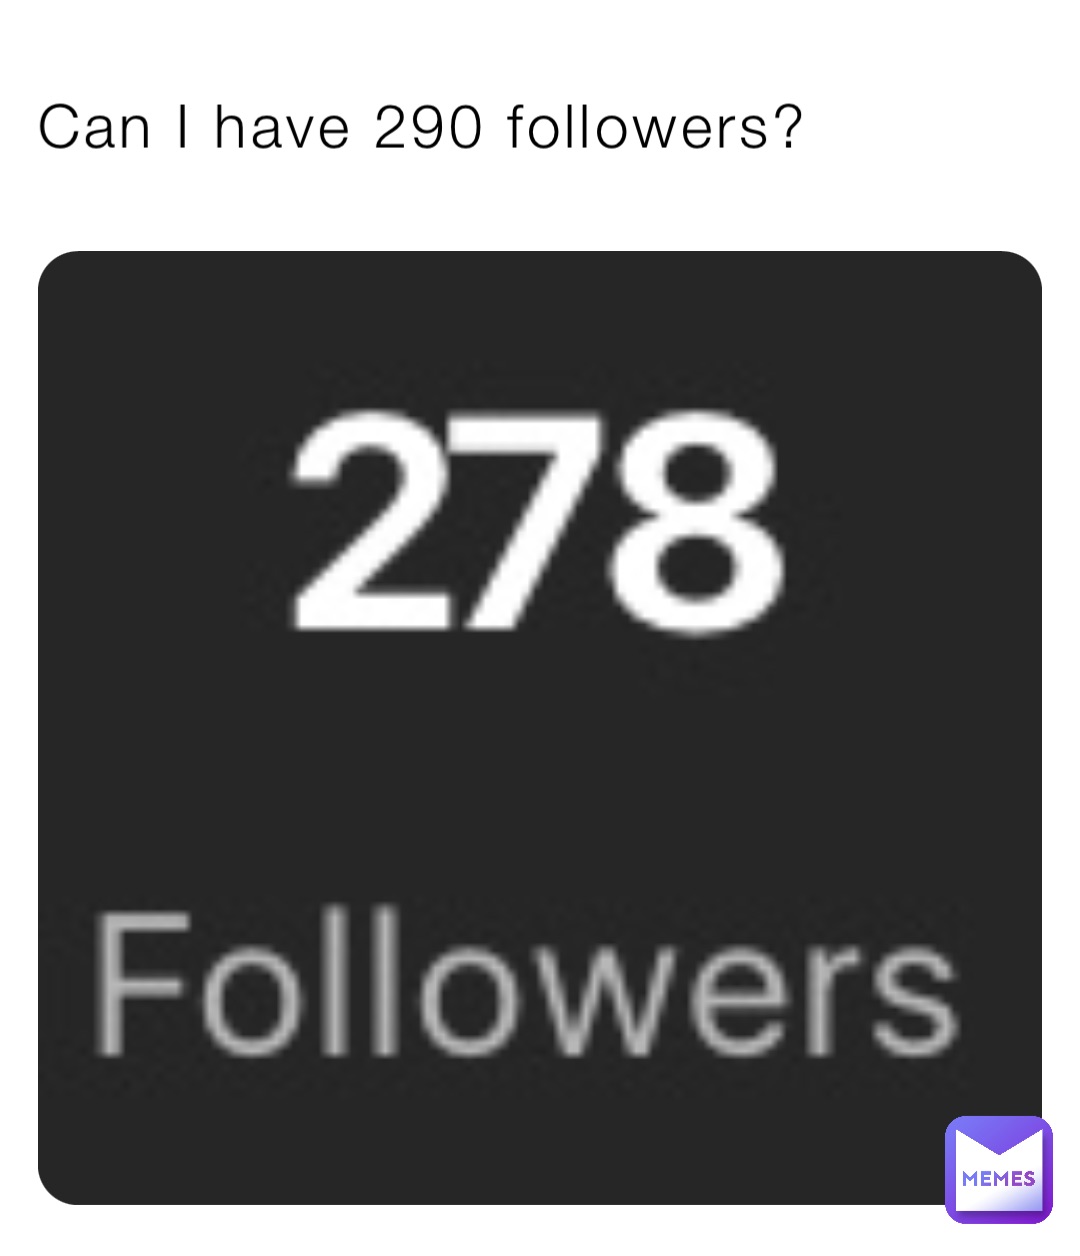 Can I have 290 followers?